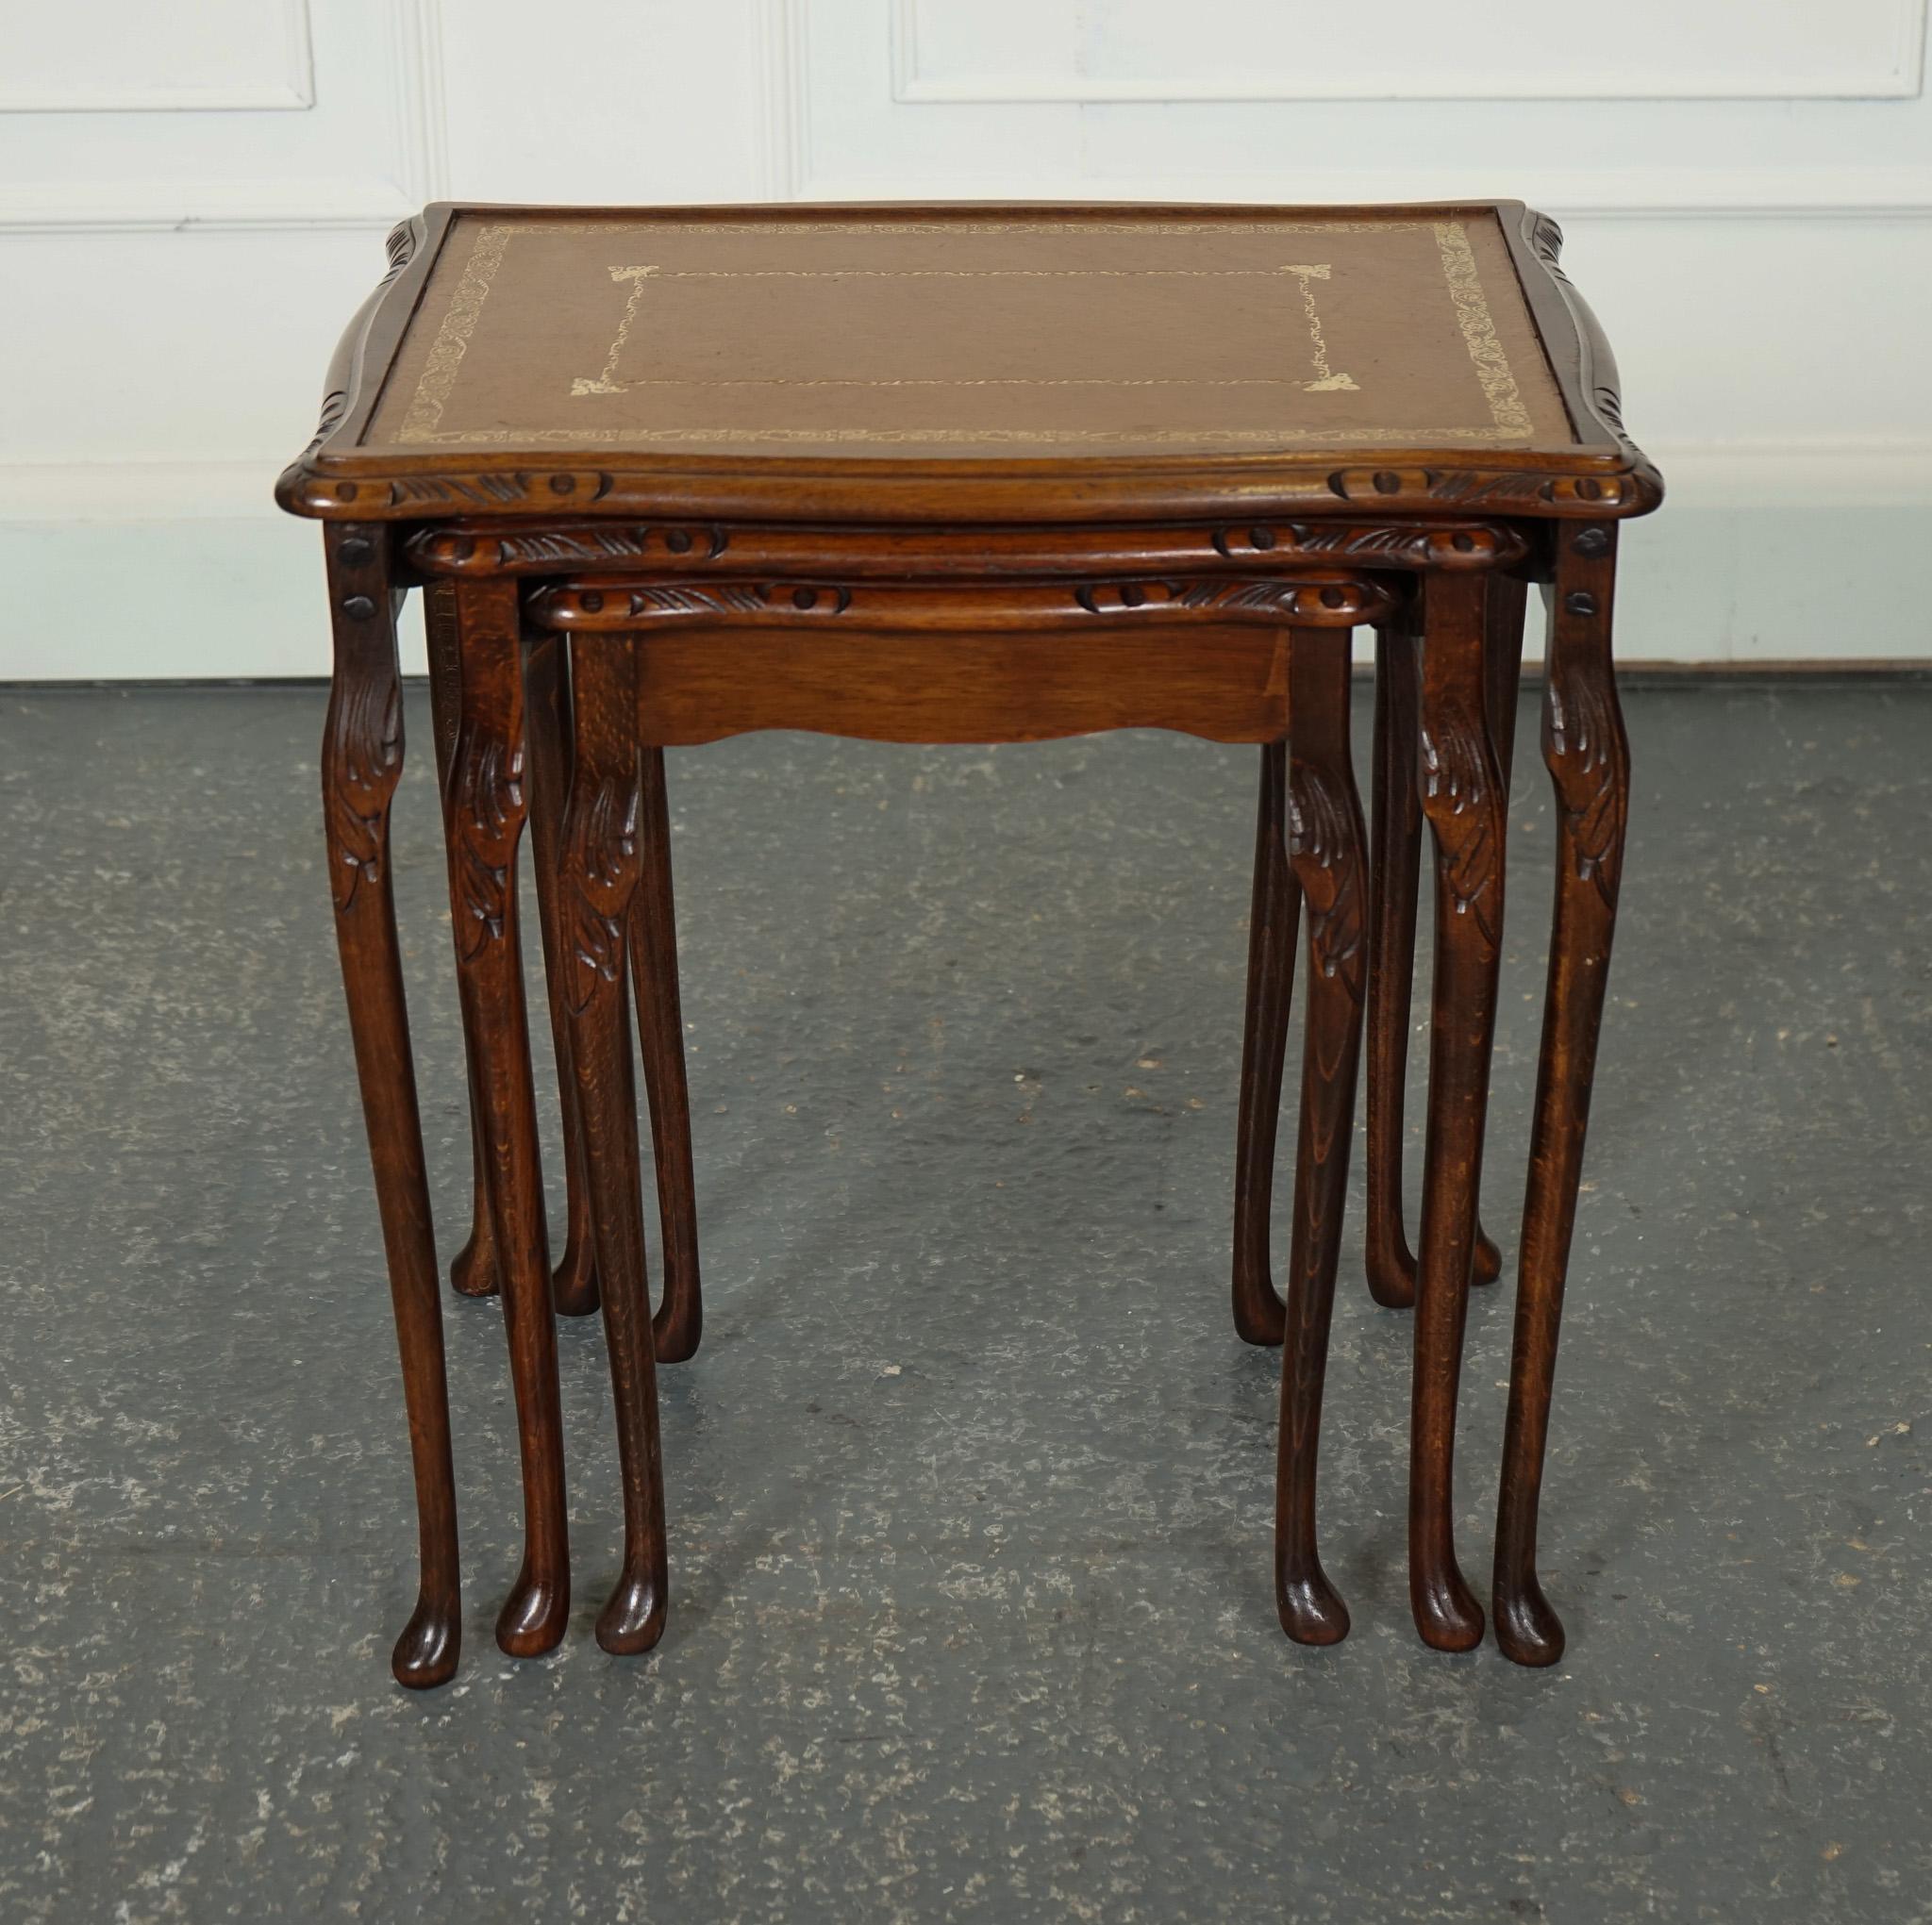 VINTAGE NEST OF TABLES QUEEN ANNE  Style LEGS WiTH BROWN EMBOSsed LEATHER TOP J1 (20. Jahrhundert) im Angebot